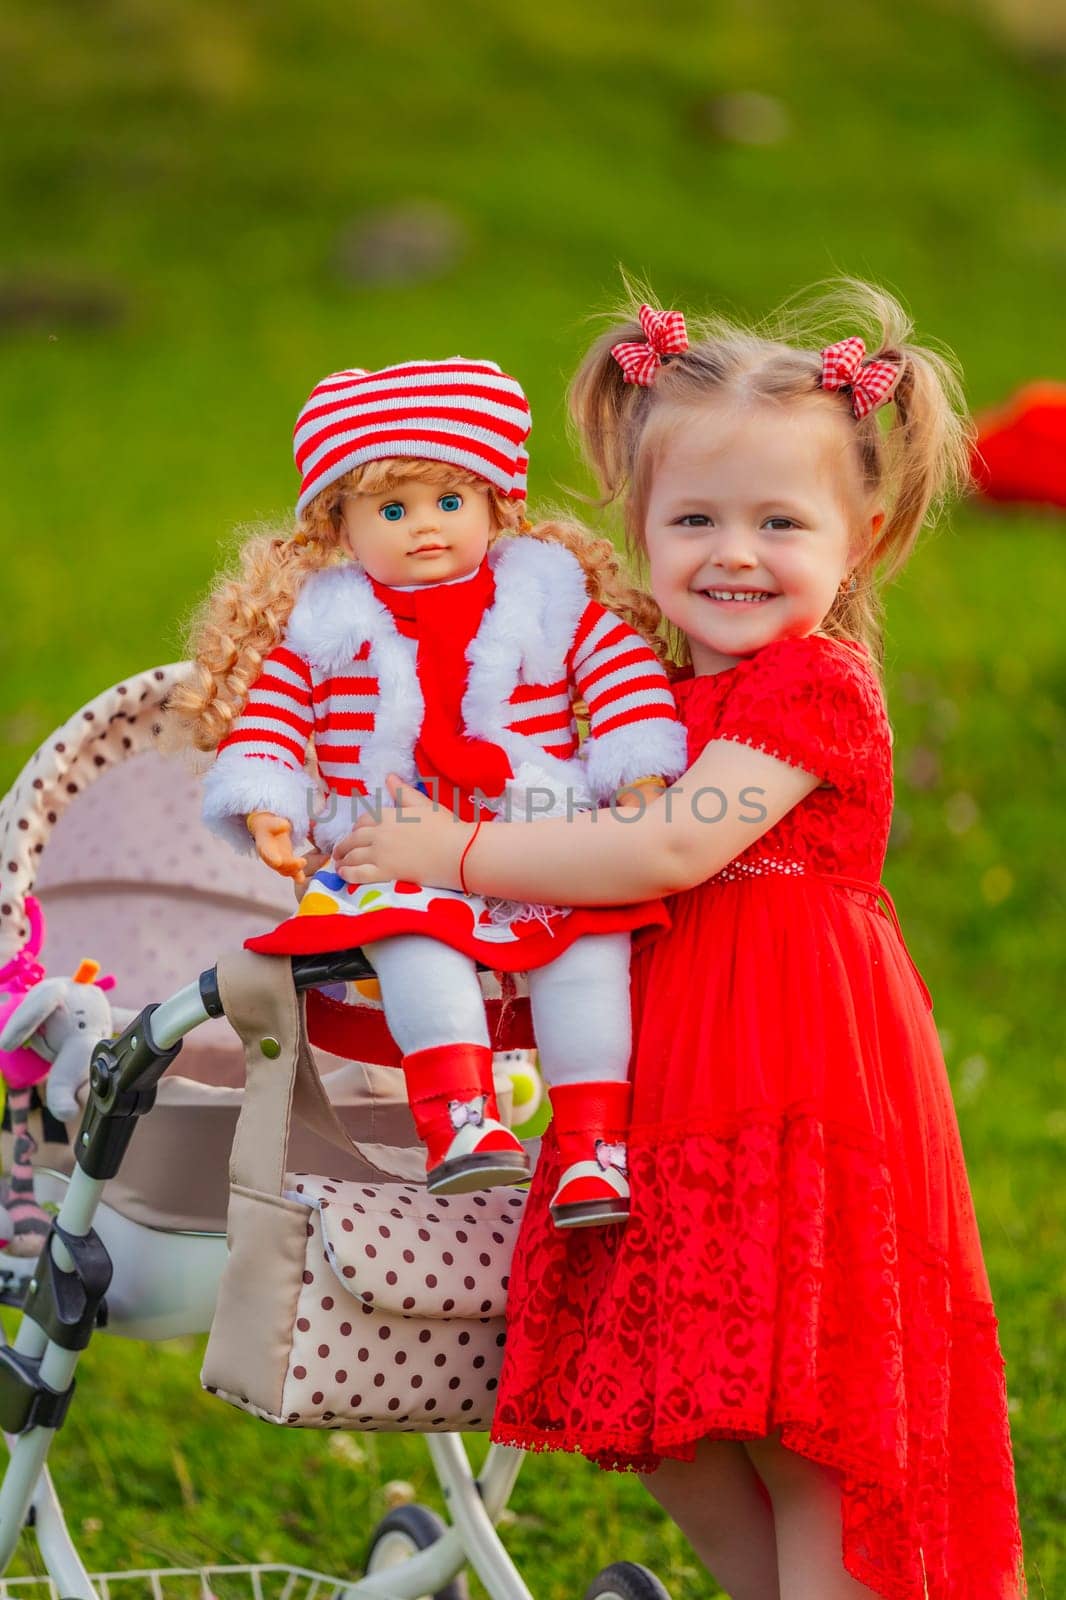 The girl plays with a doll in nature, holding her in her arms